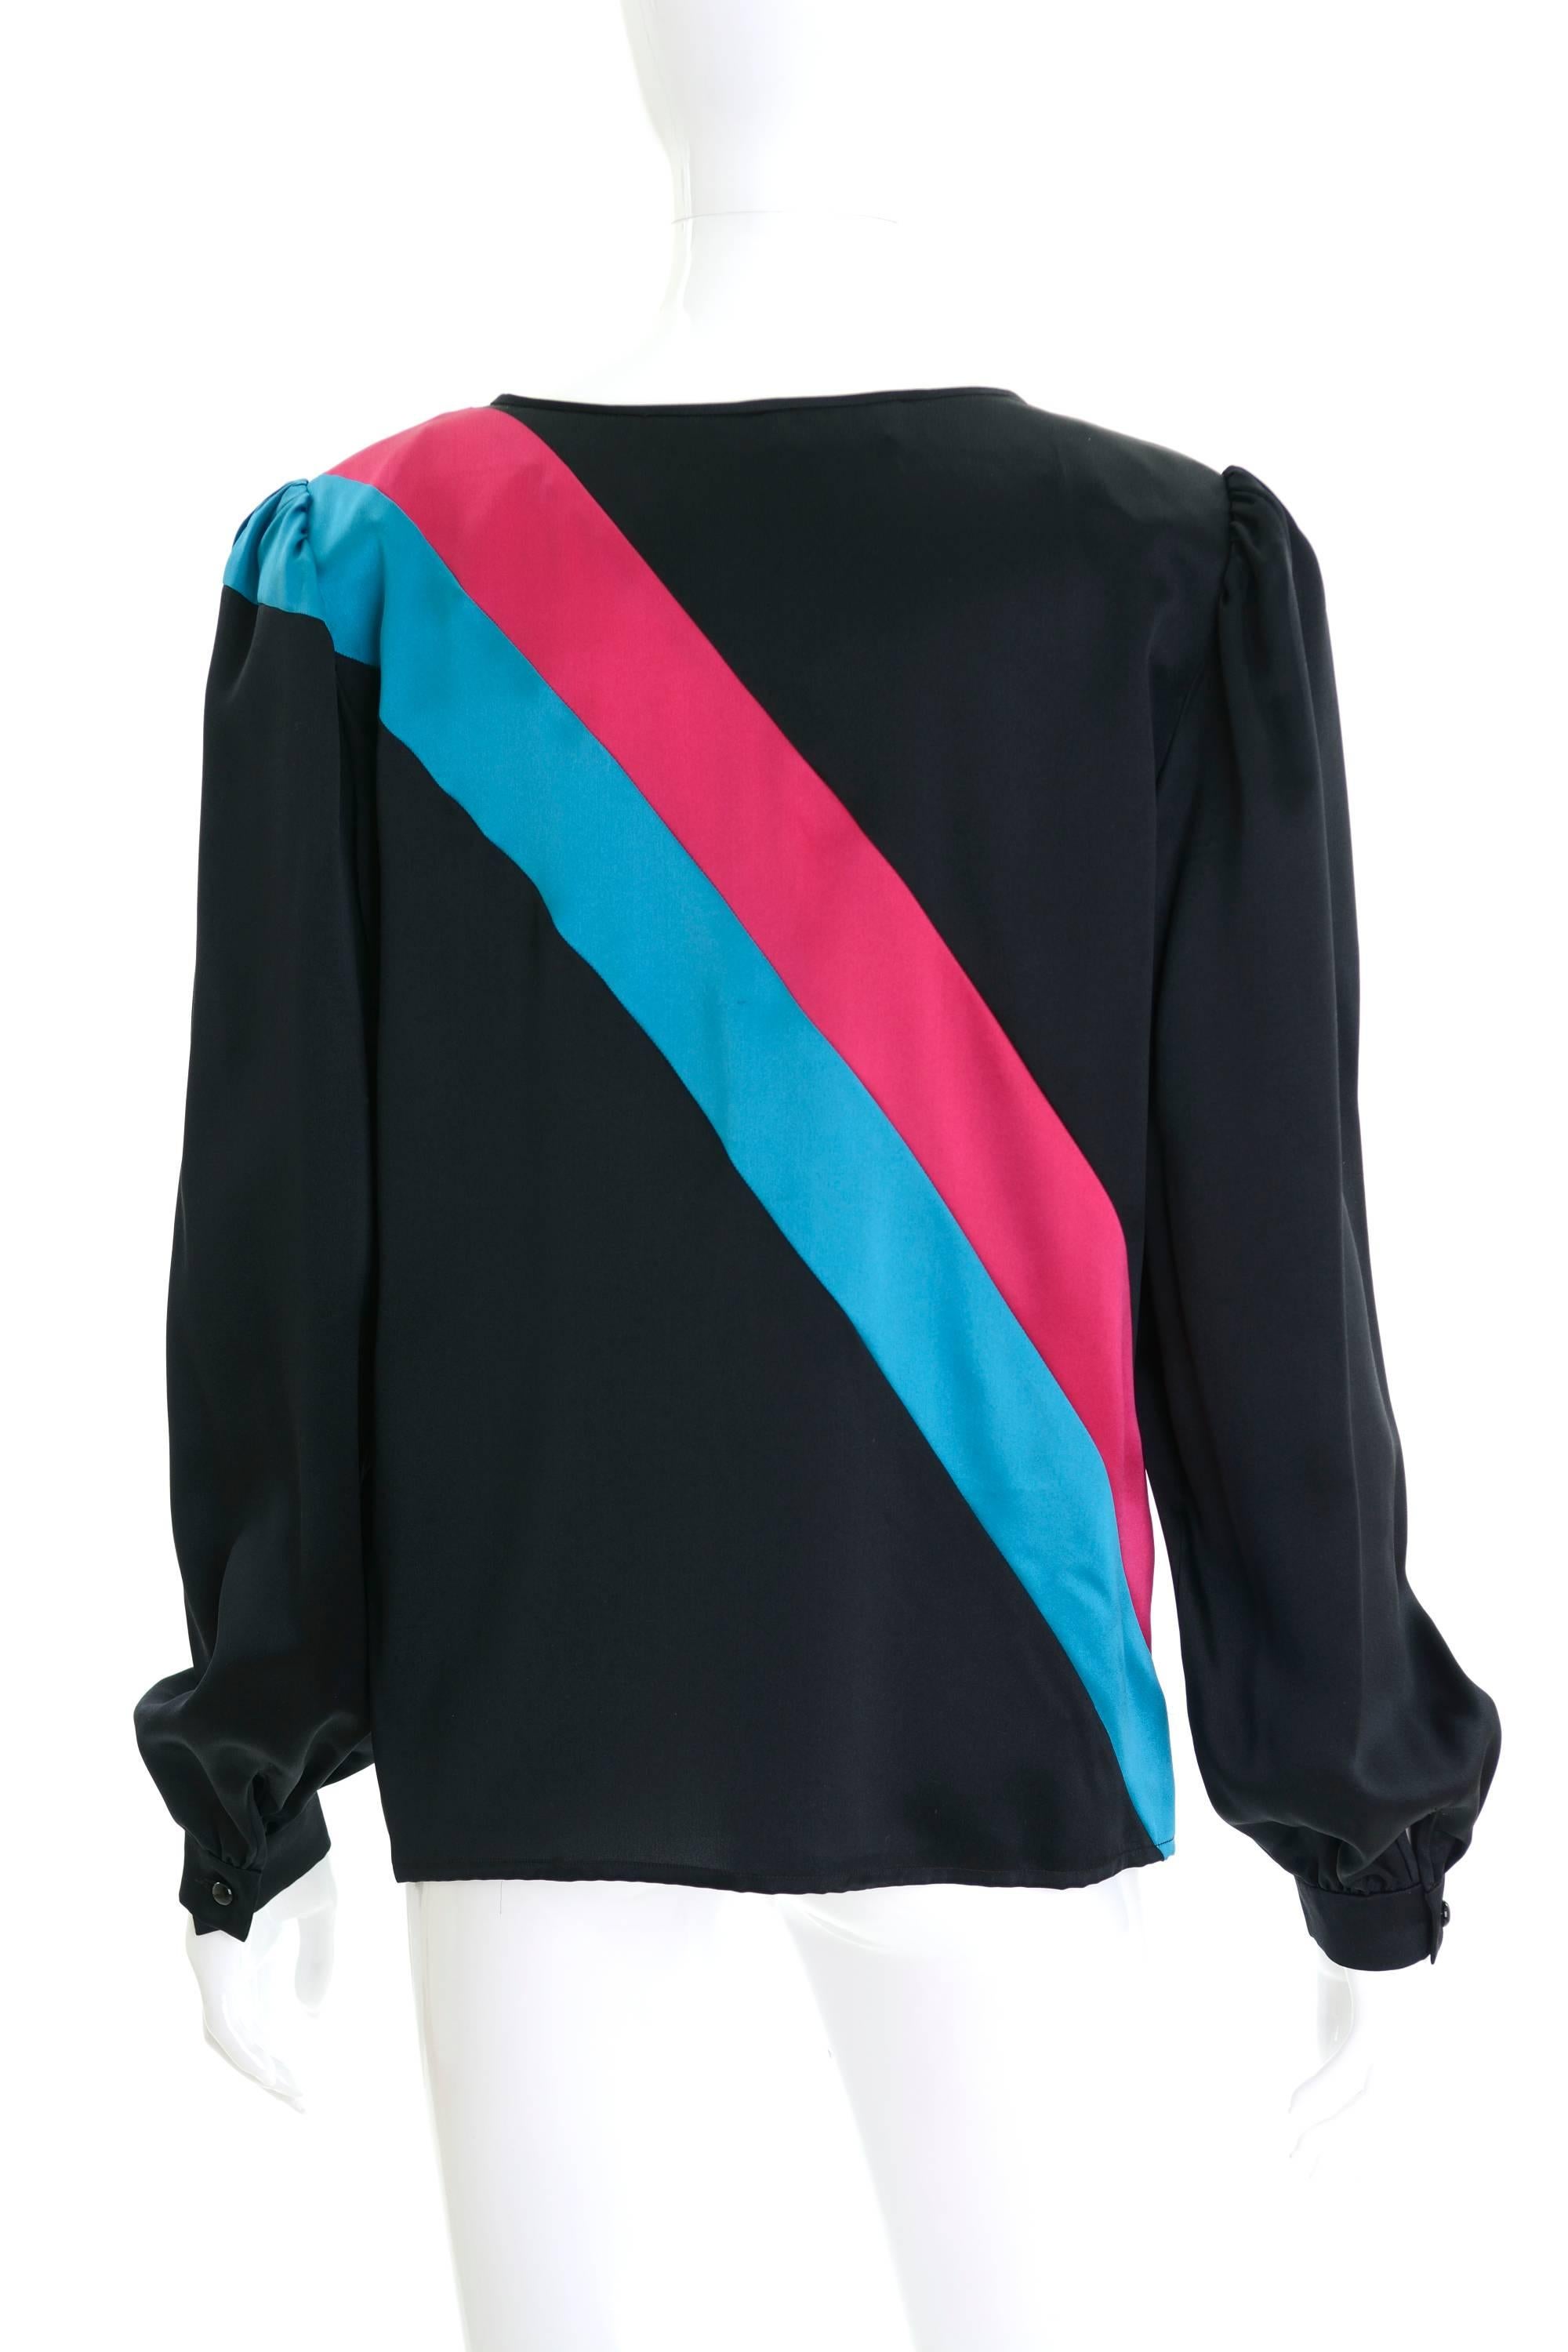 This lovely Valentino 1980s blouse shirt is in a black satin silk fabric with fuchsia and turquoise asymmetric stripes details. It has one button closure and puffed long sleeve. 

Very good vintage condition

Label: Valentino Boutique (made in